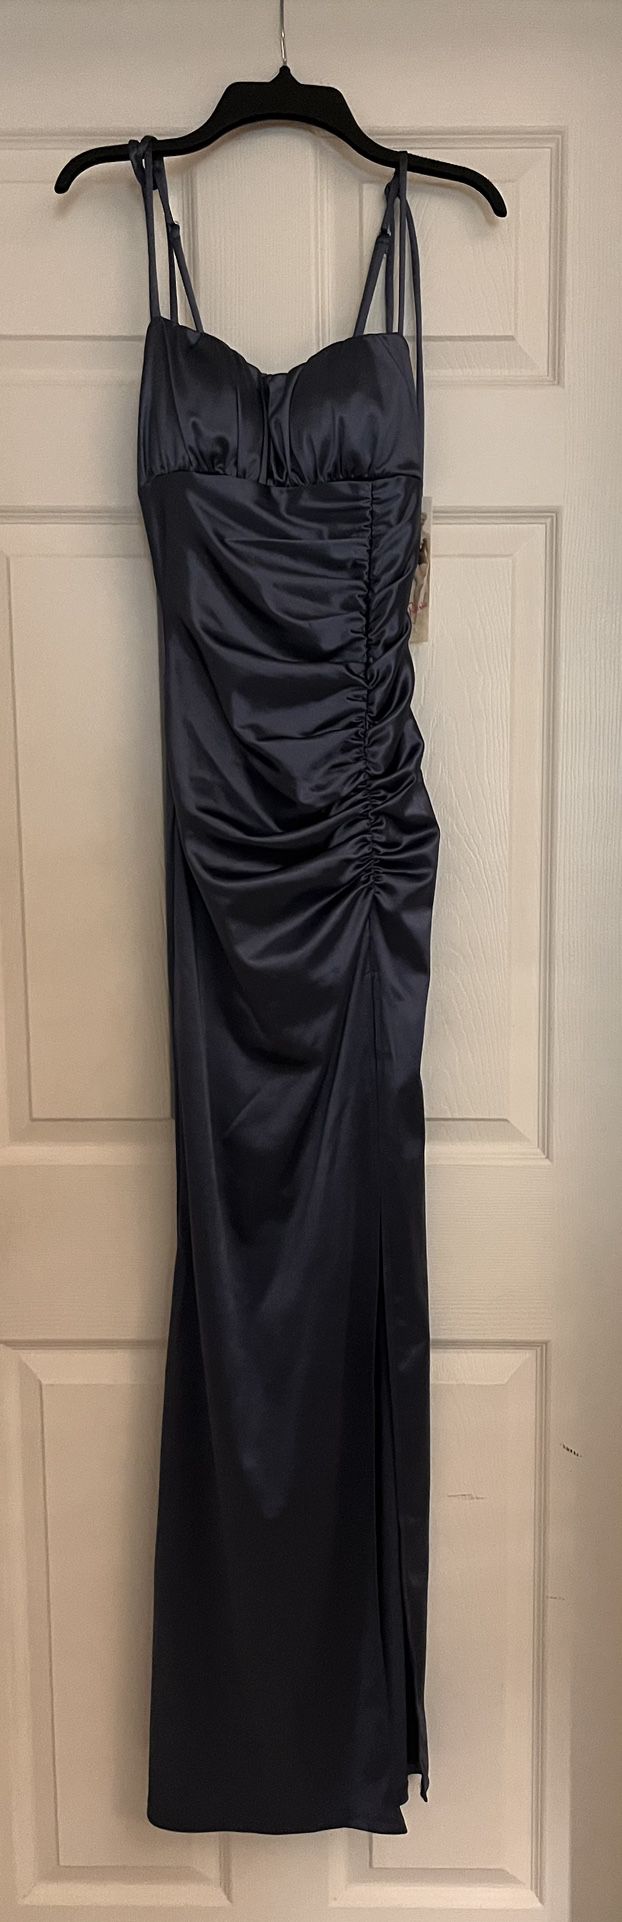 Beautiful Prom Dress Or For Any Occasion